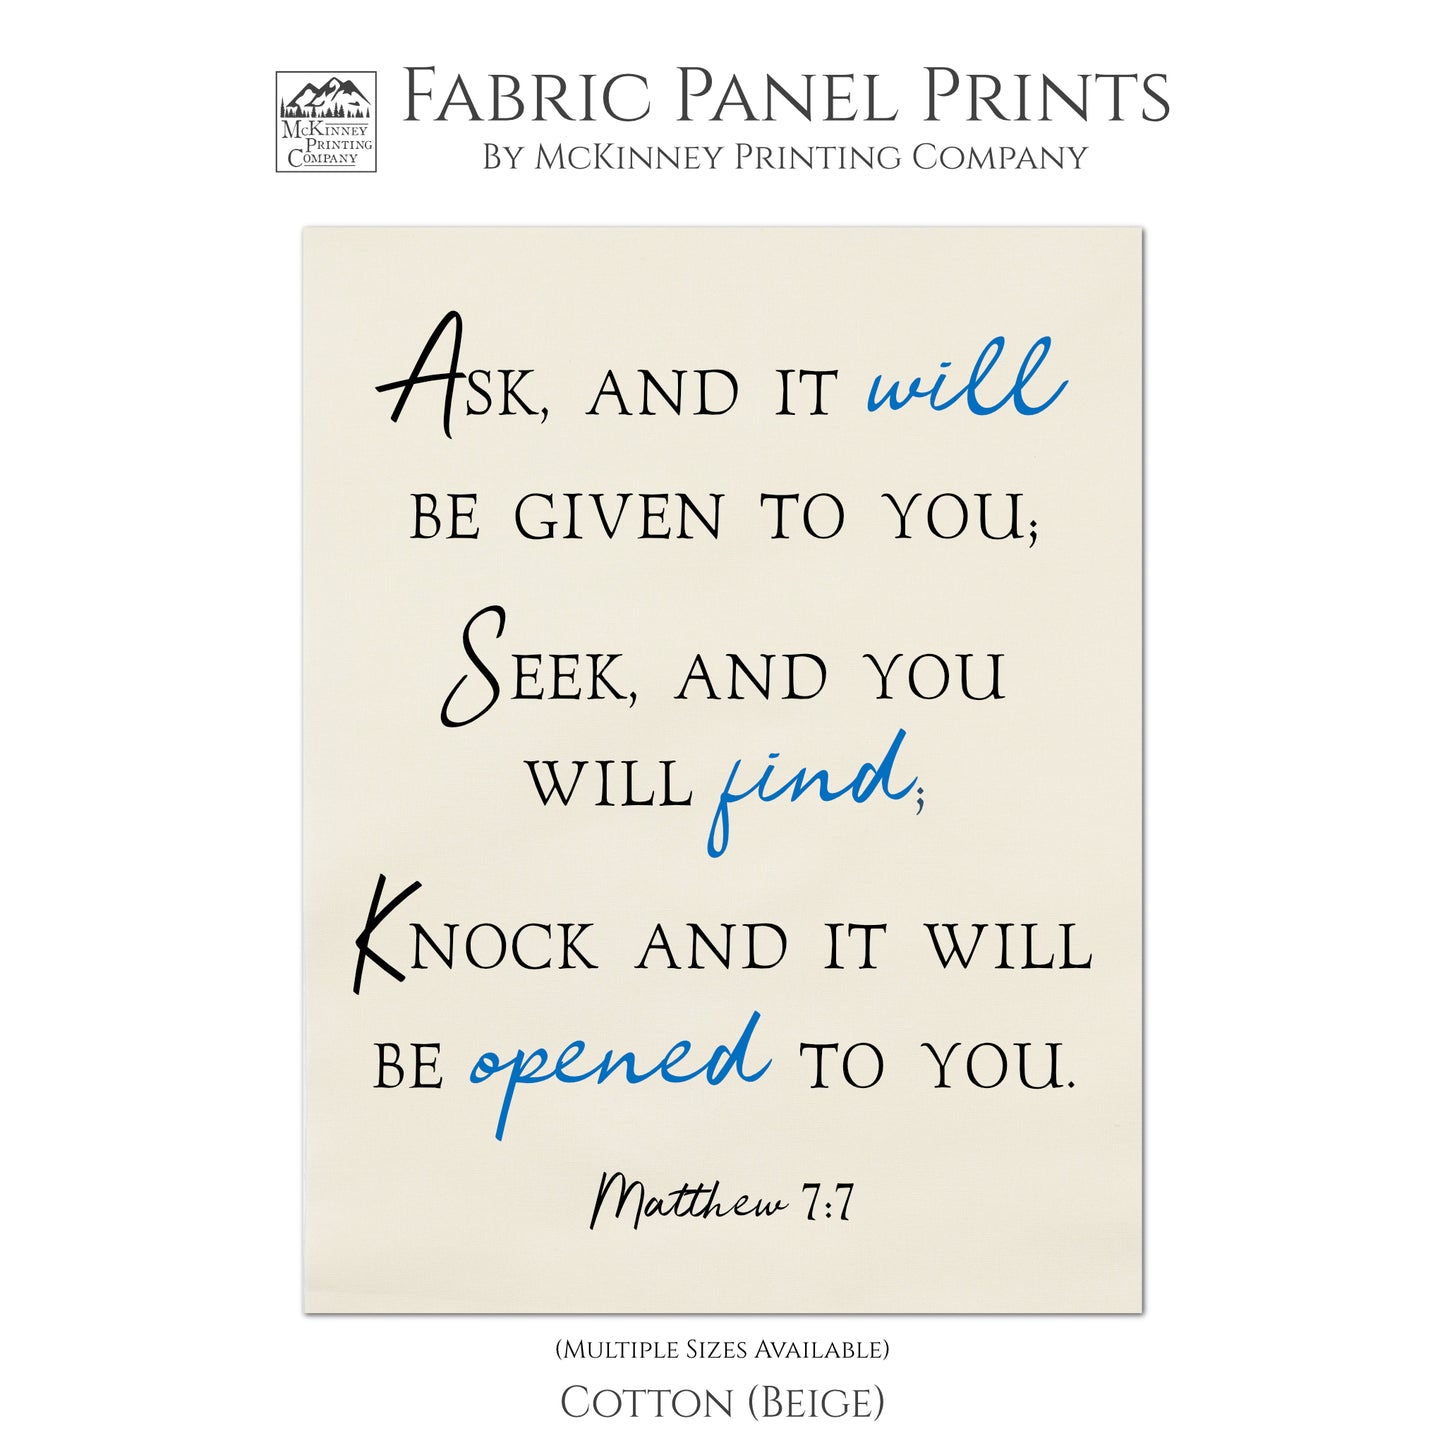 Ask, and it will be given to you; Seek, and you will find; Knock and it will be opened to you. - Matthew 7 7 - Fabric Panel Print, Wall Hanging, Scripture Fabric, Religious Fabric, Quilt Block - Muslin